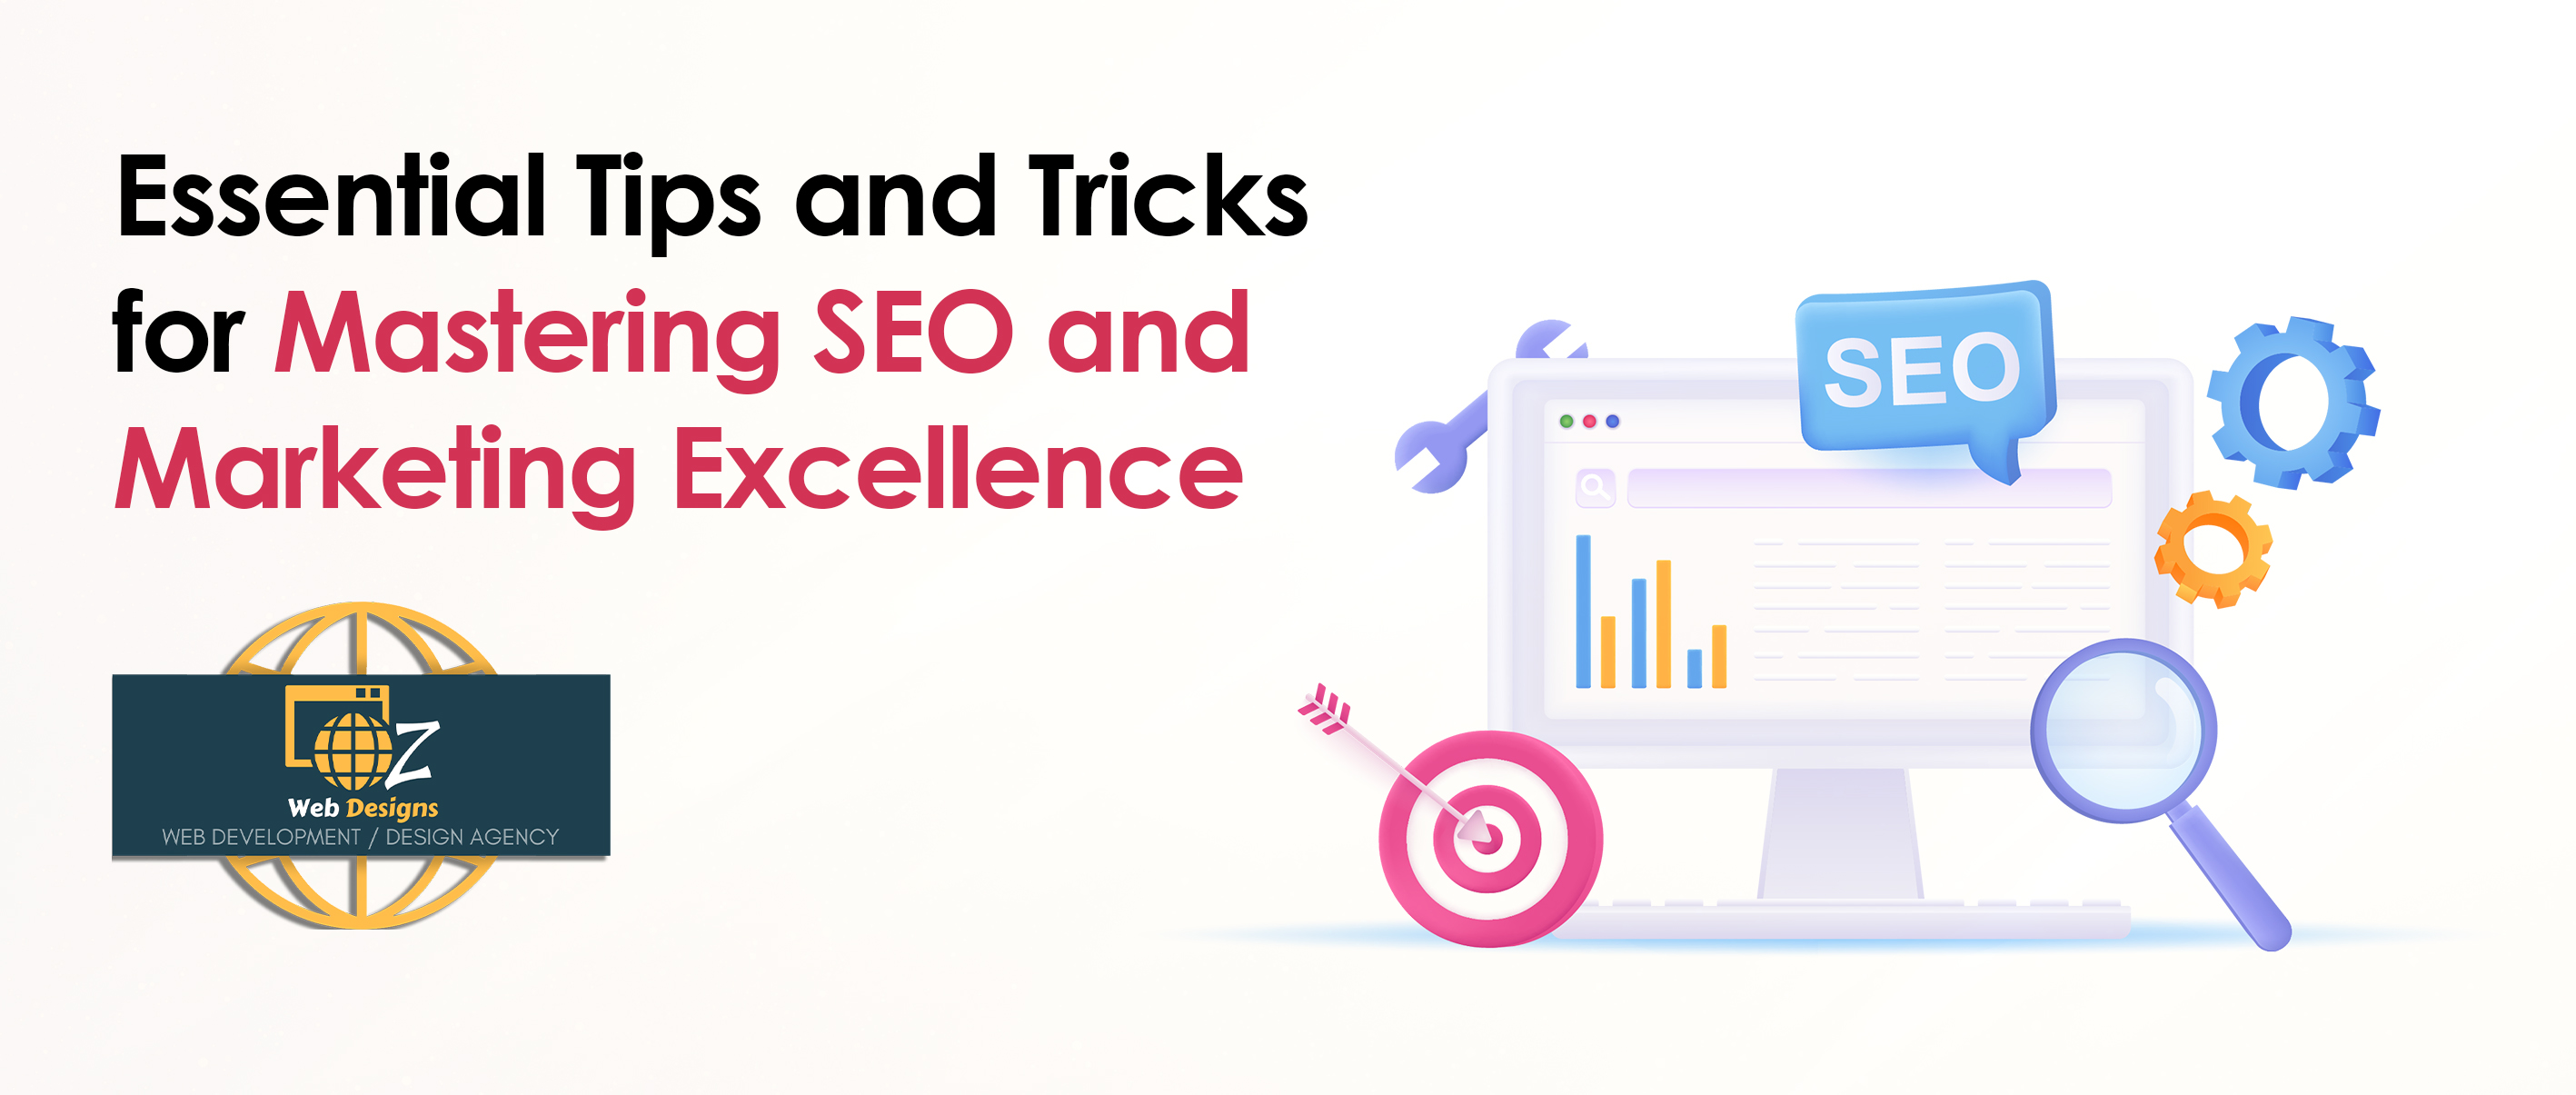 Essential Tips and Tricks for Mastering SEO and Marketing Excellence